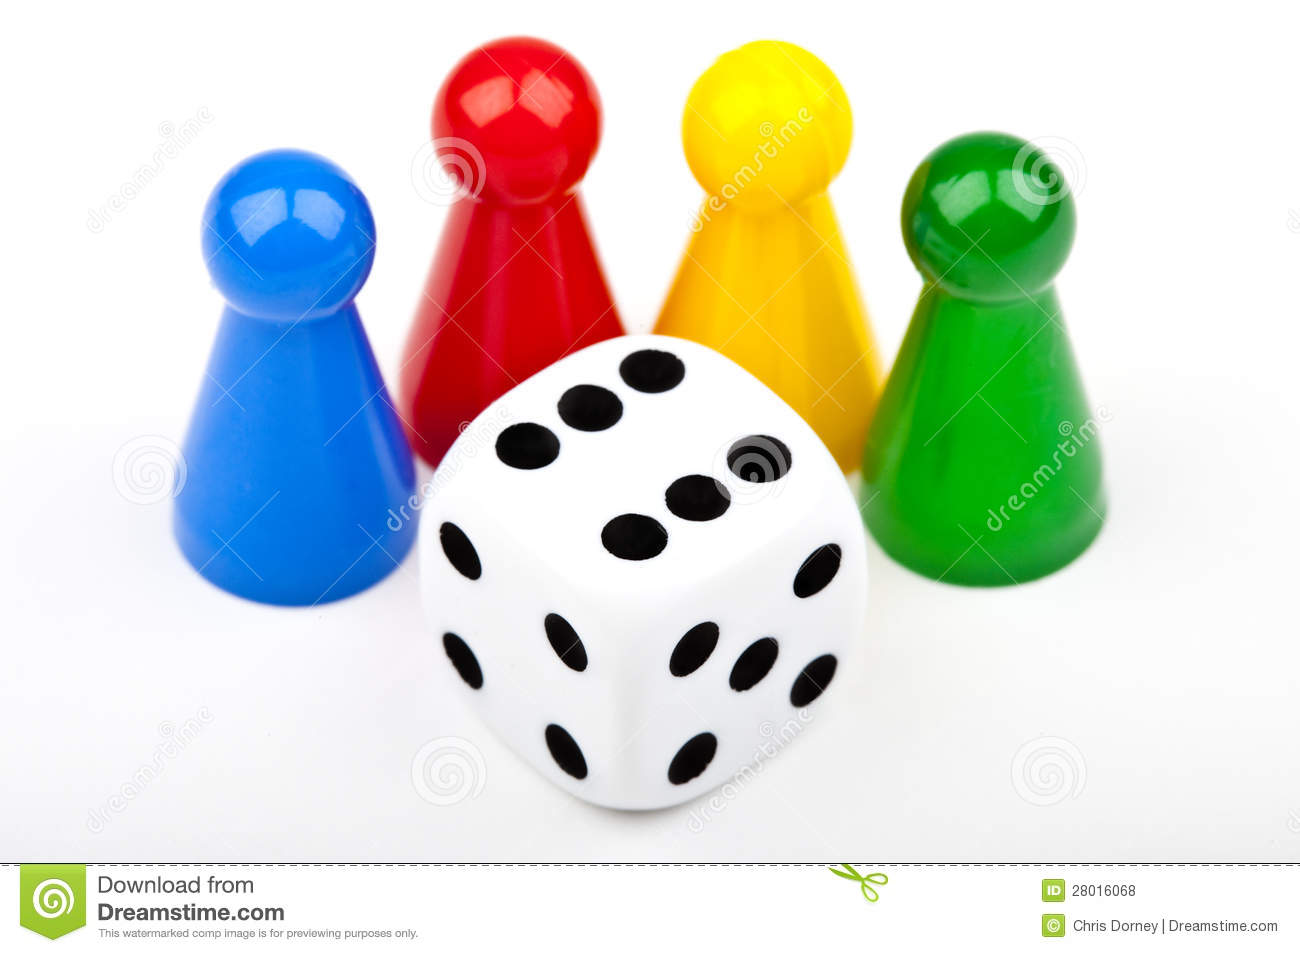 Board Game Pieces And Dice Royalty Free Stock Photos   Image  28016068